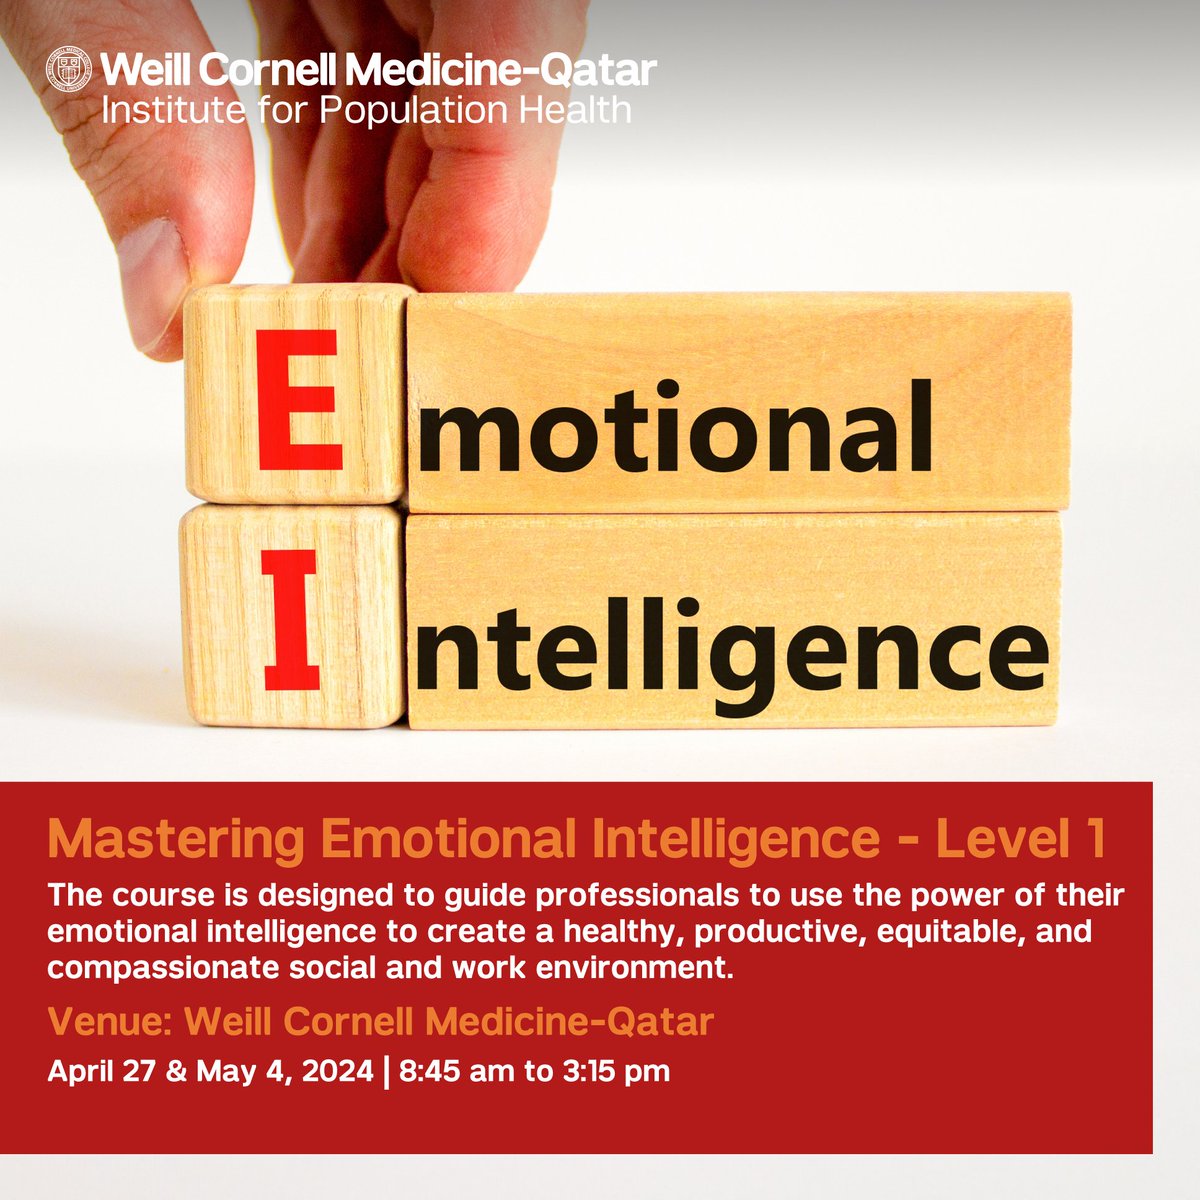 Emotions matter! Noticing #emotions at work or at school can build #trust. It is an integral part to the development of social relationships. 
To learn more about how to build your social relationships, please join our training: 
ow.ly/ZTaj50R6kIL

#IPHQatar @WCMQatar